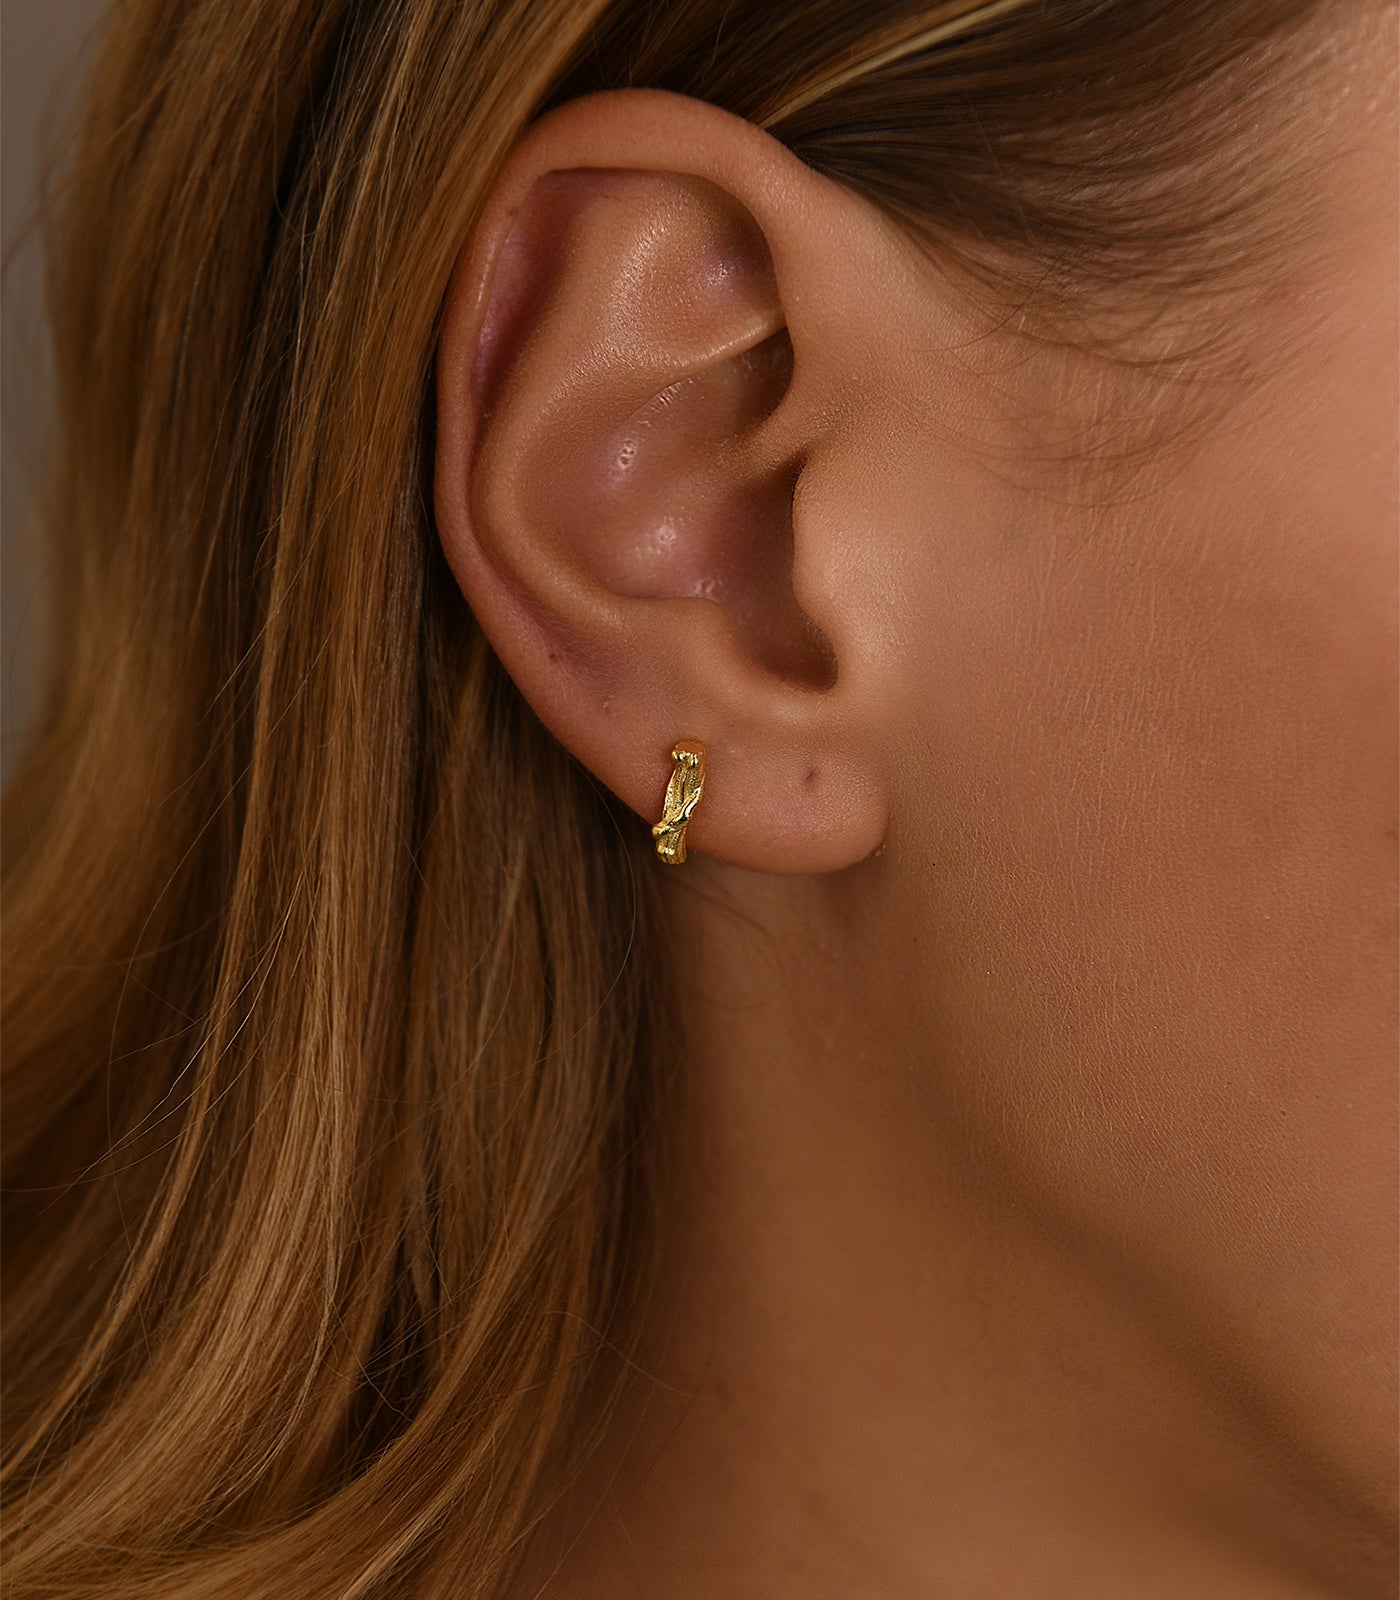 A gold vermeil stud earring. The stud earring is detailed to resemble a tree branch.